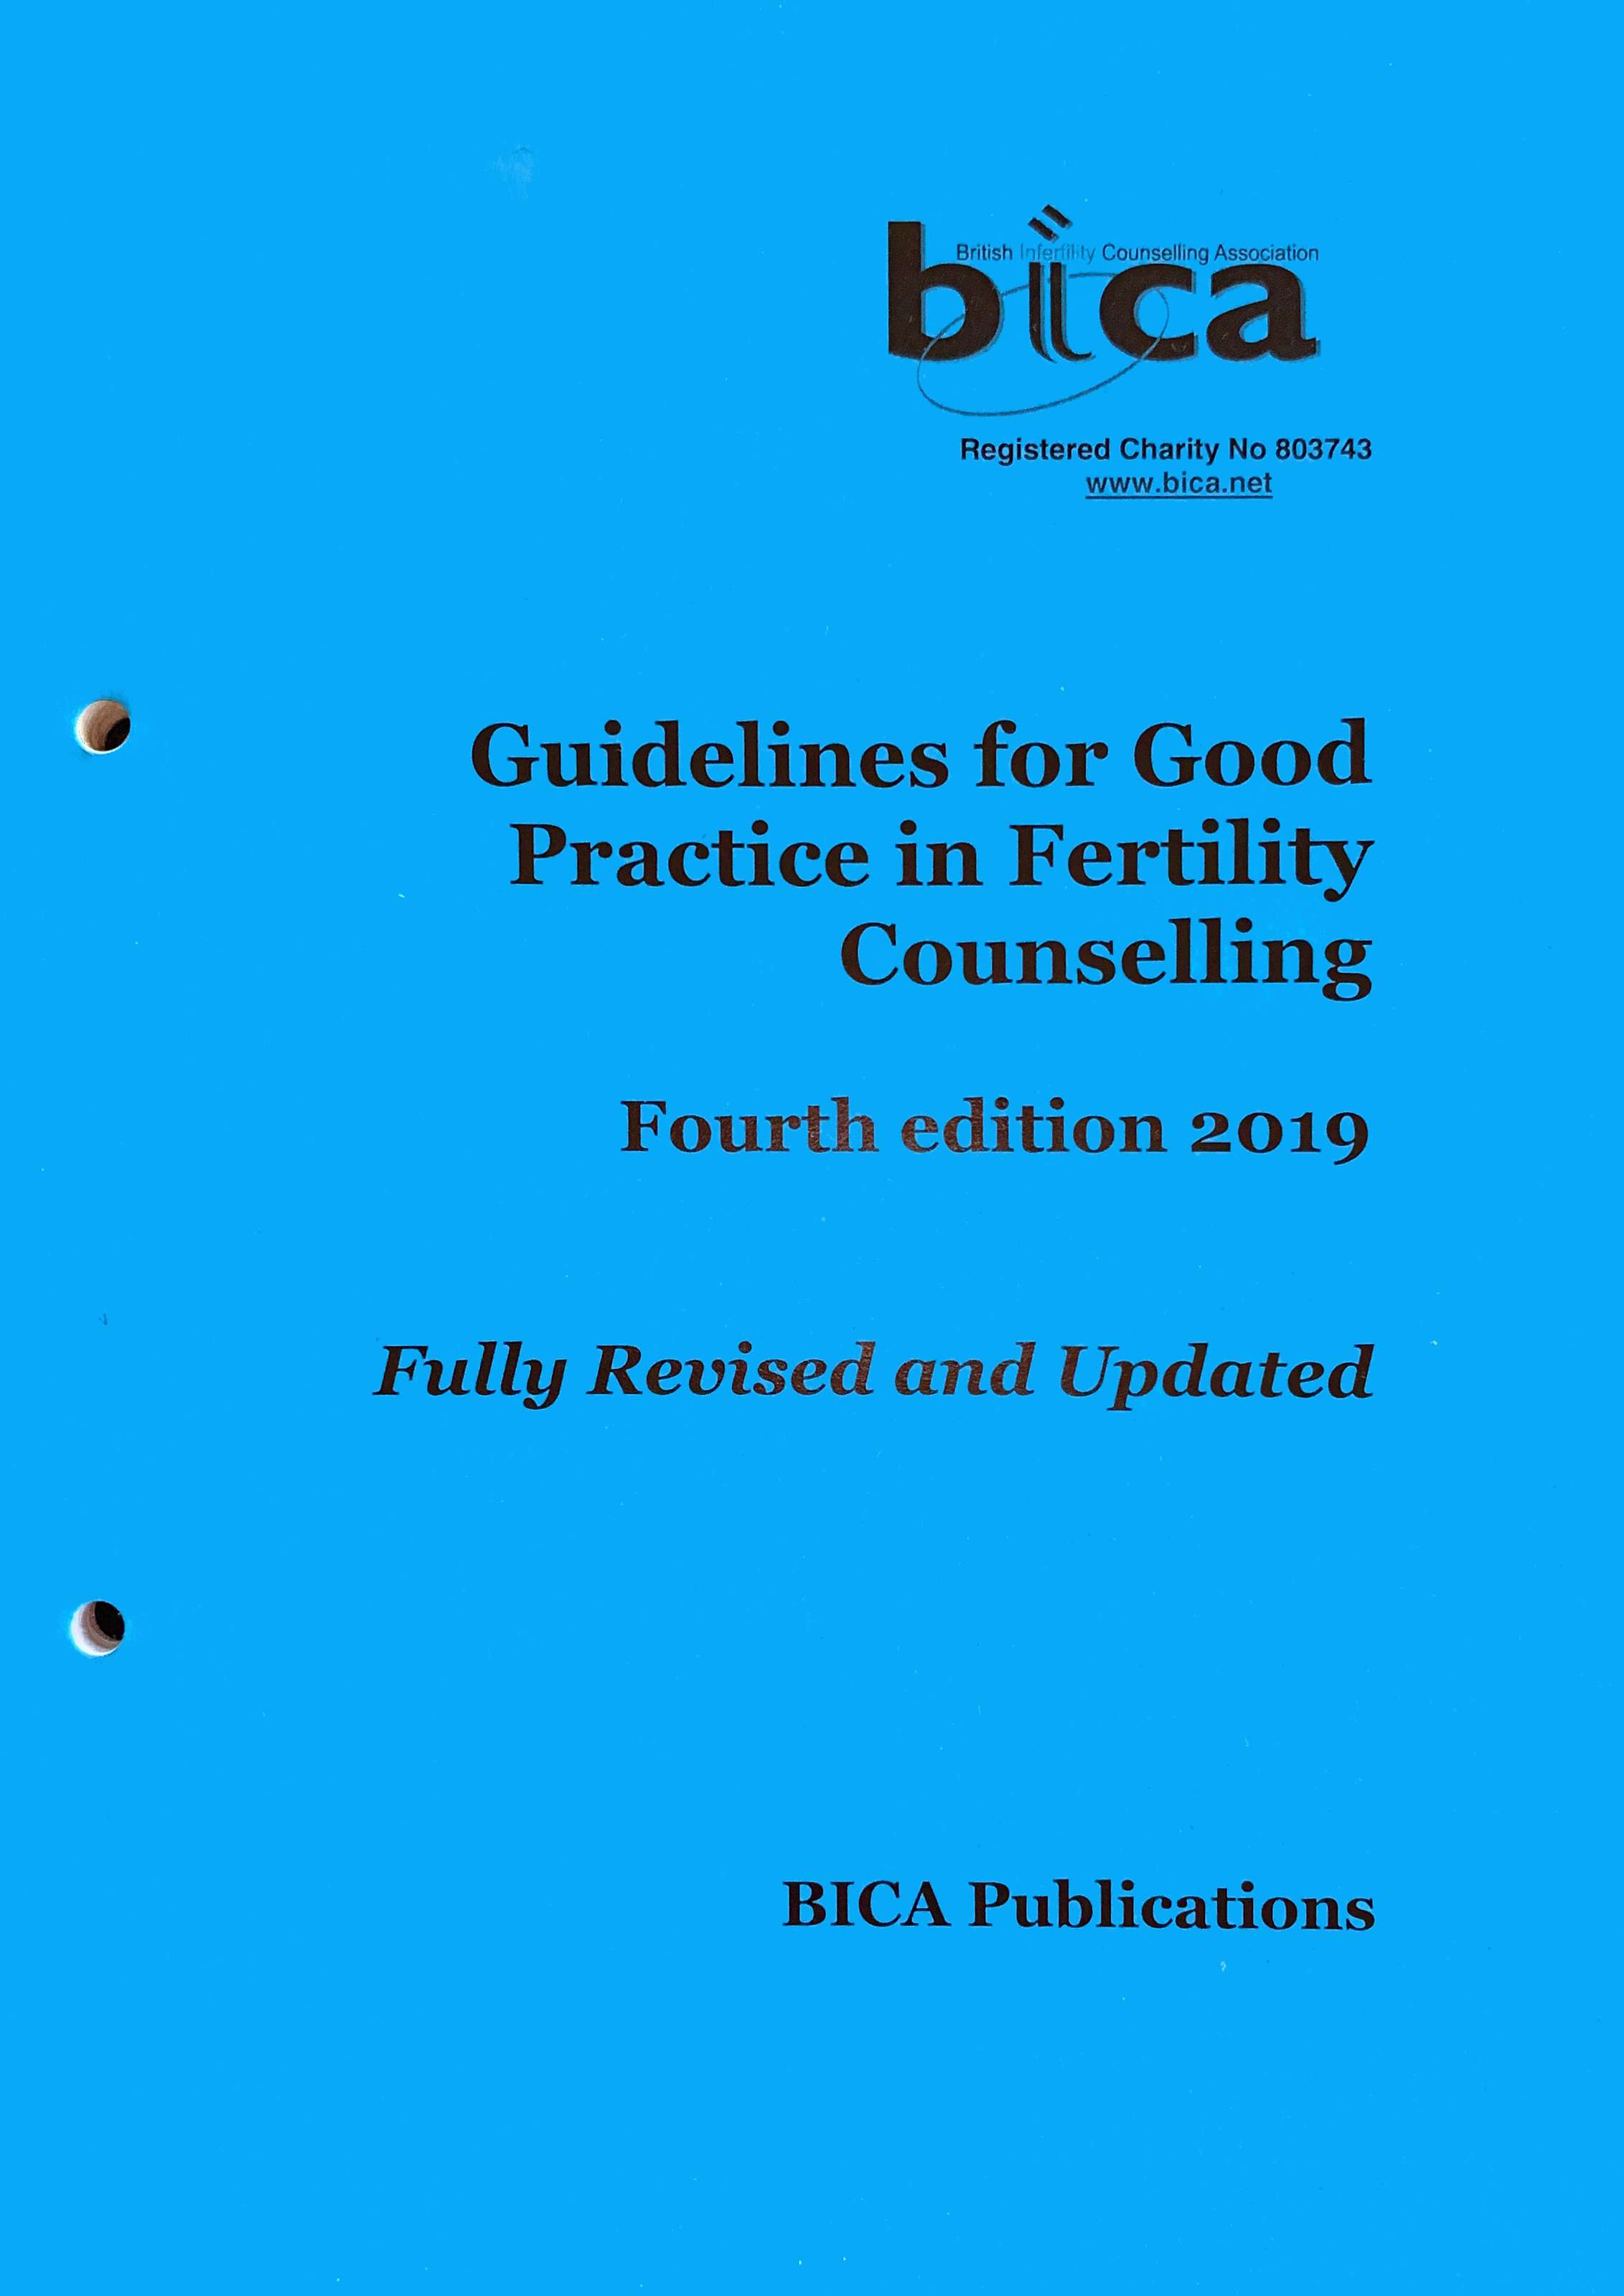 Launch of Guidelines for Good Practice in Fertility Counselling Fourth Edition 2019 image